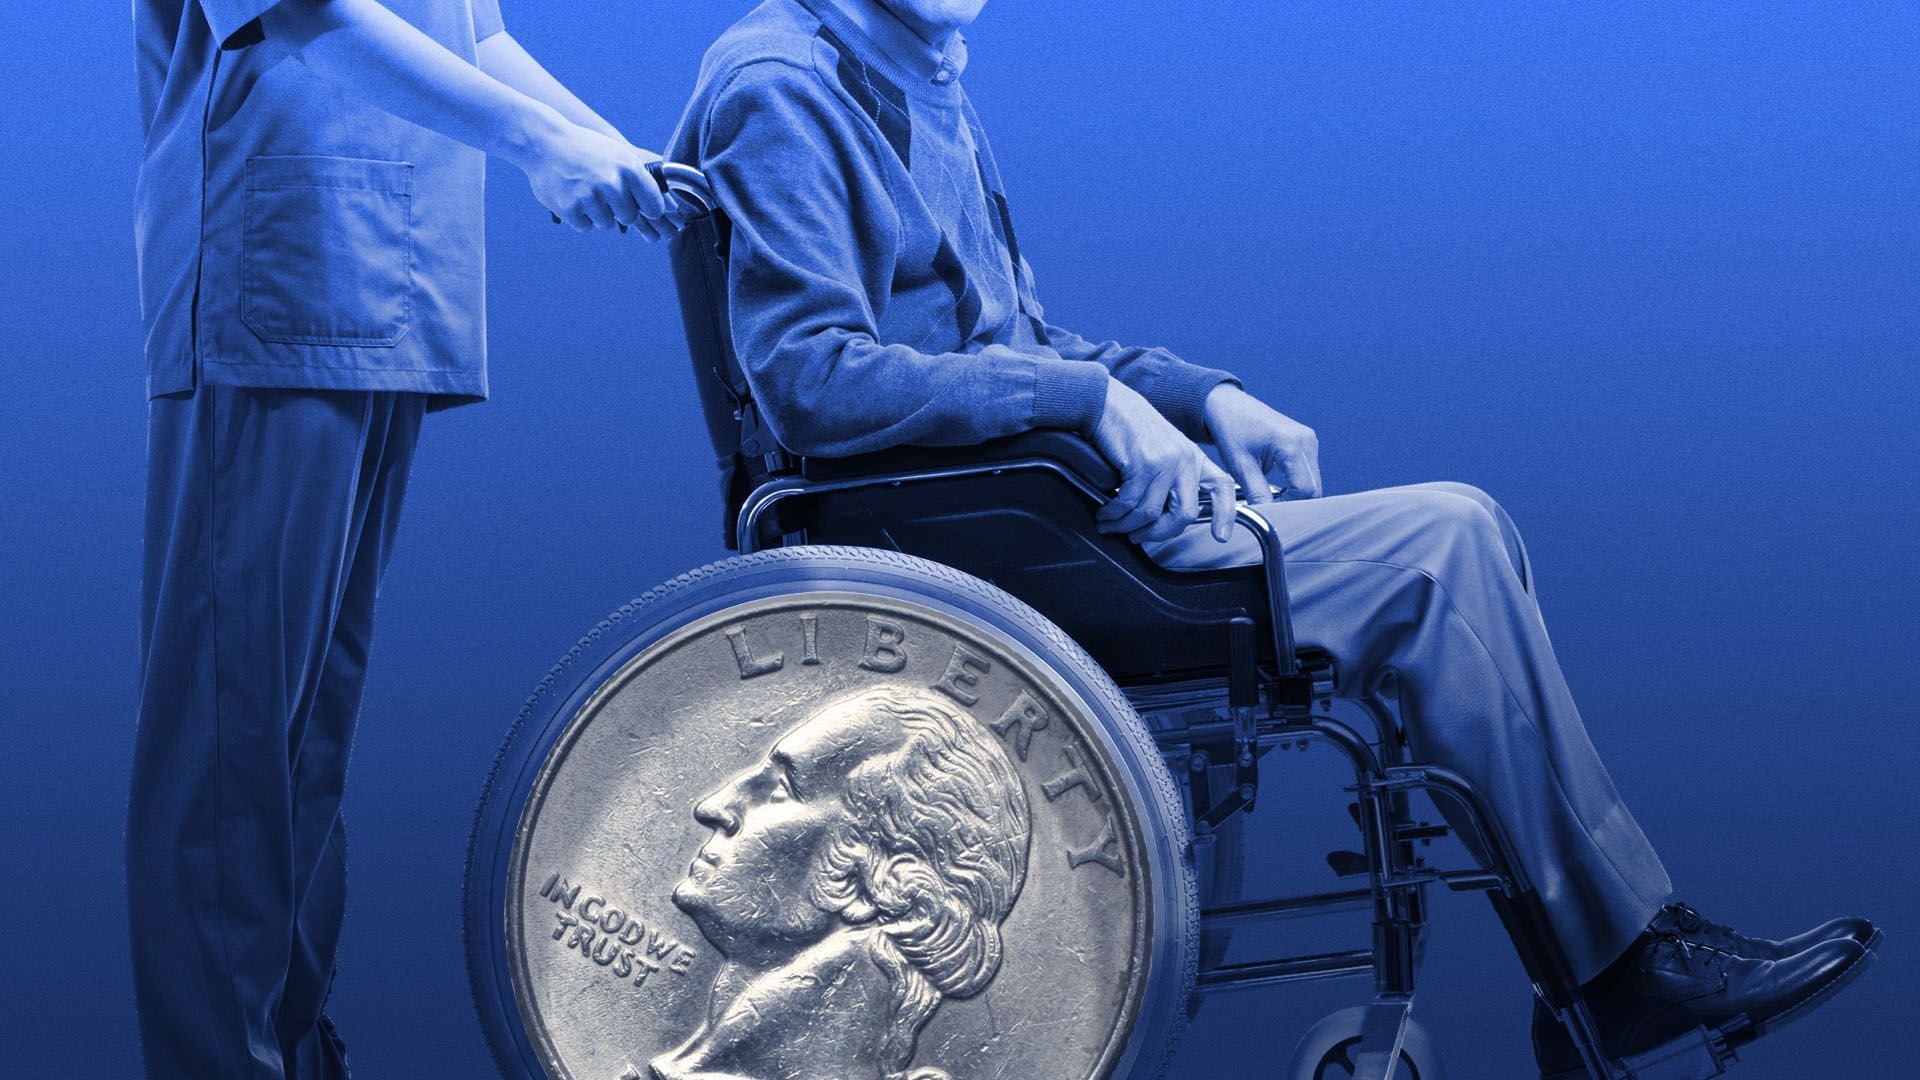 Illustration of an elderly man in a wheelchair with a giant quarter for a wheel